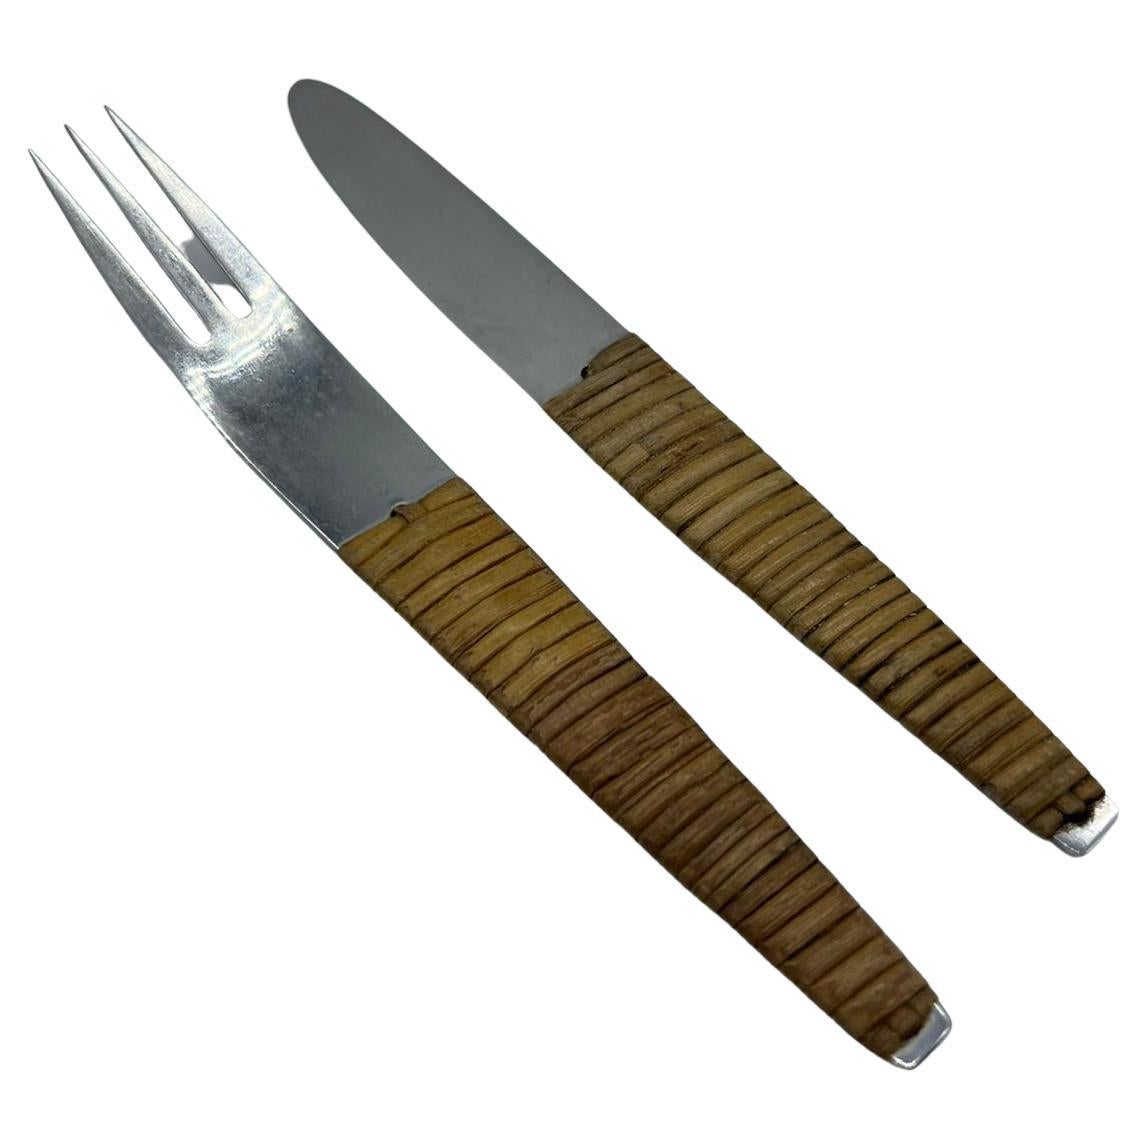 Carl Auböck, Stainless Steel and Rattan Knife and Fork, 1950s